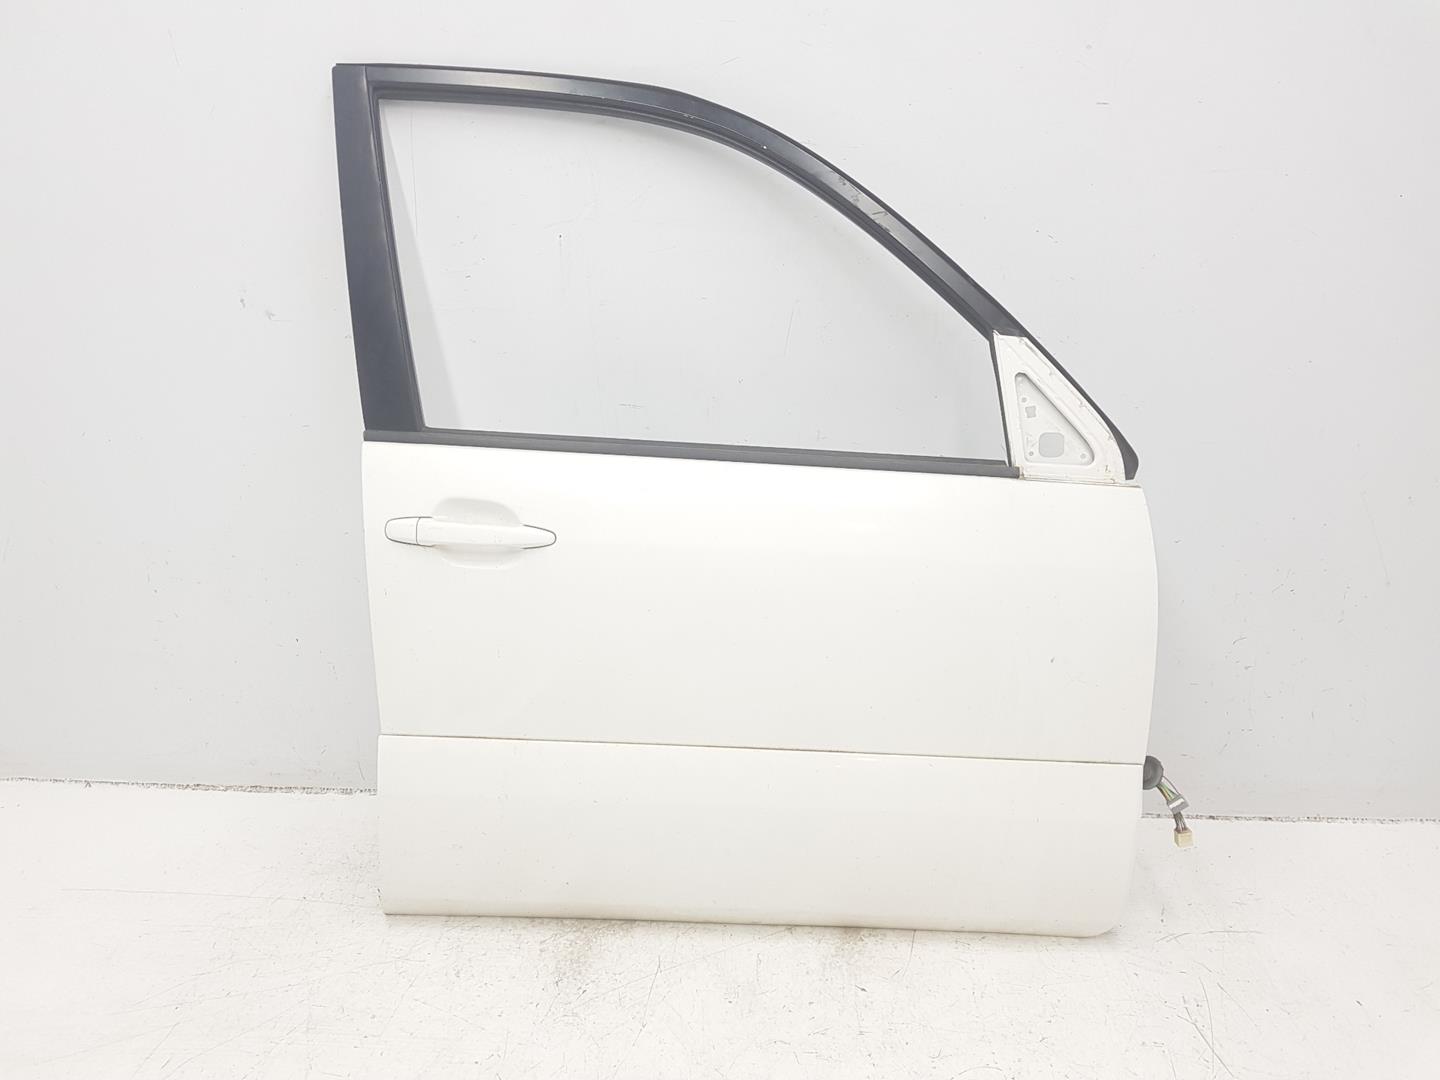 TOYOTA Land Cruiser 70 Series (1984-2024) Front Right Door 6700160540, 6700160540, COLORBLANCO056 24229331